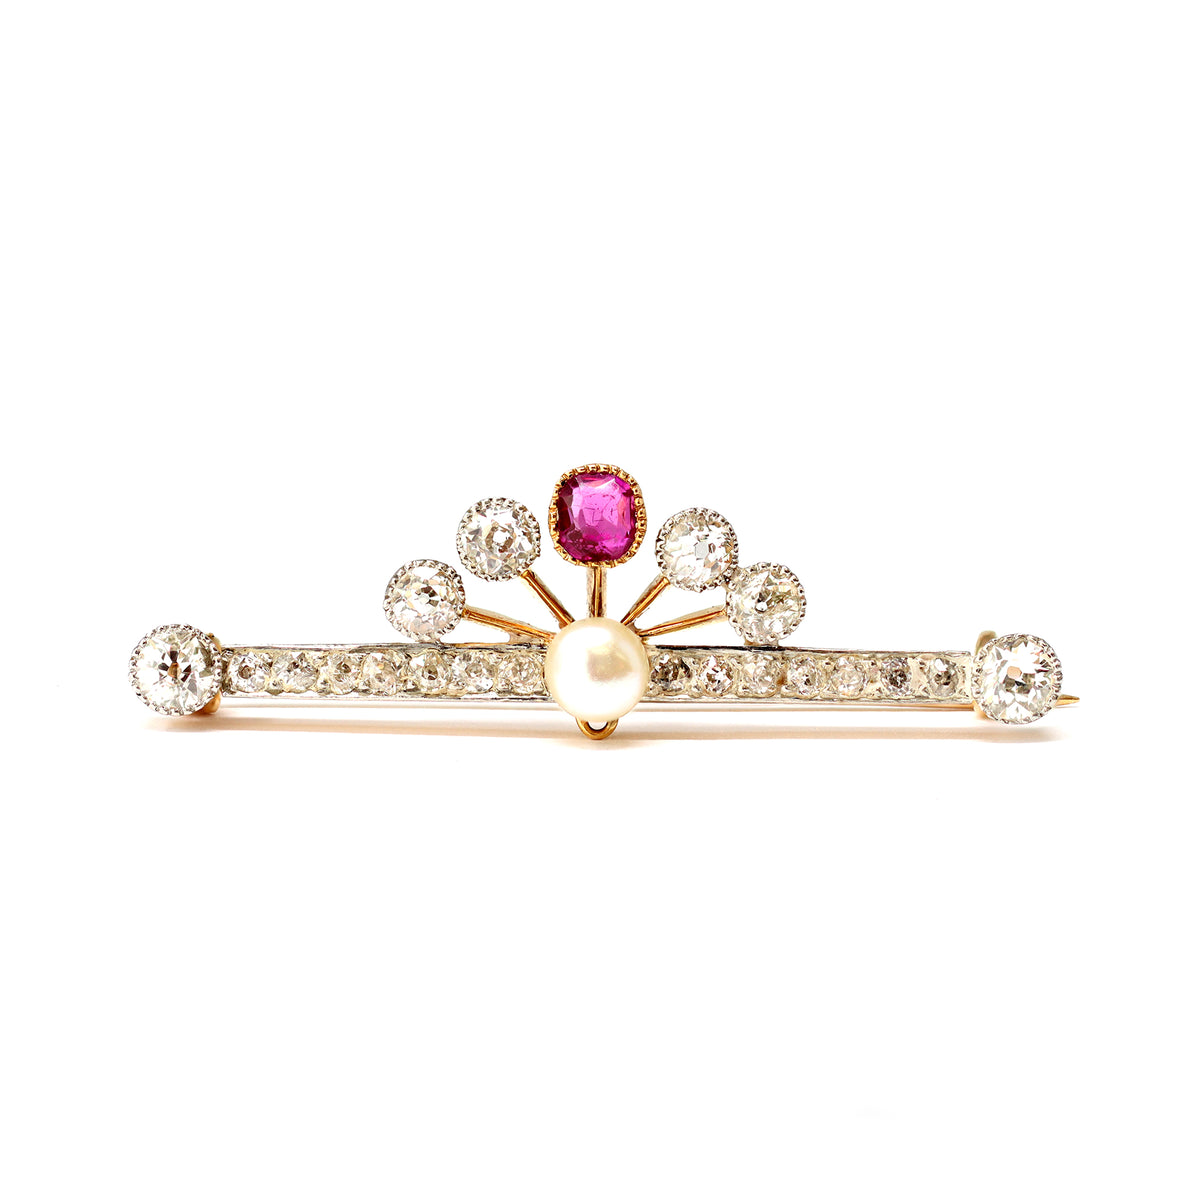 Victorian-14-karat-yellow-gold-diamond-ruby-and-pearl-brooch-front-view-2000x2000